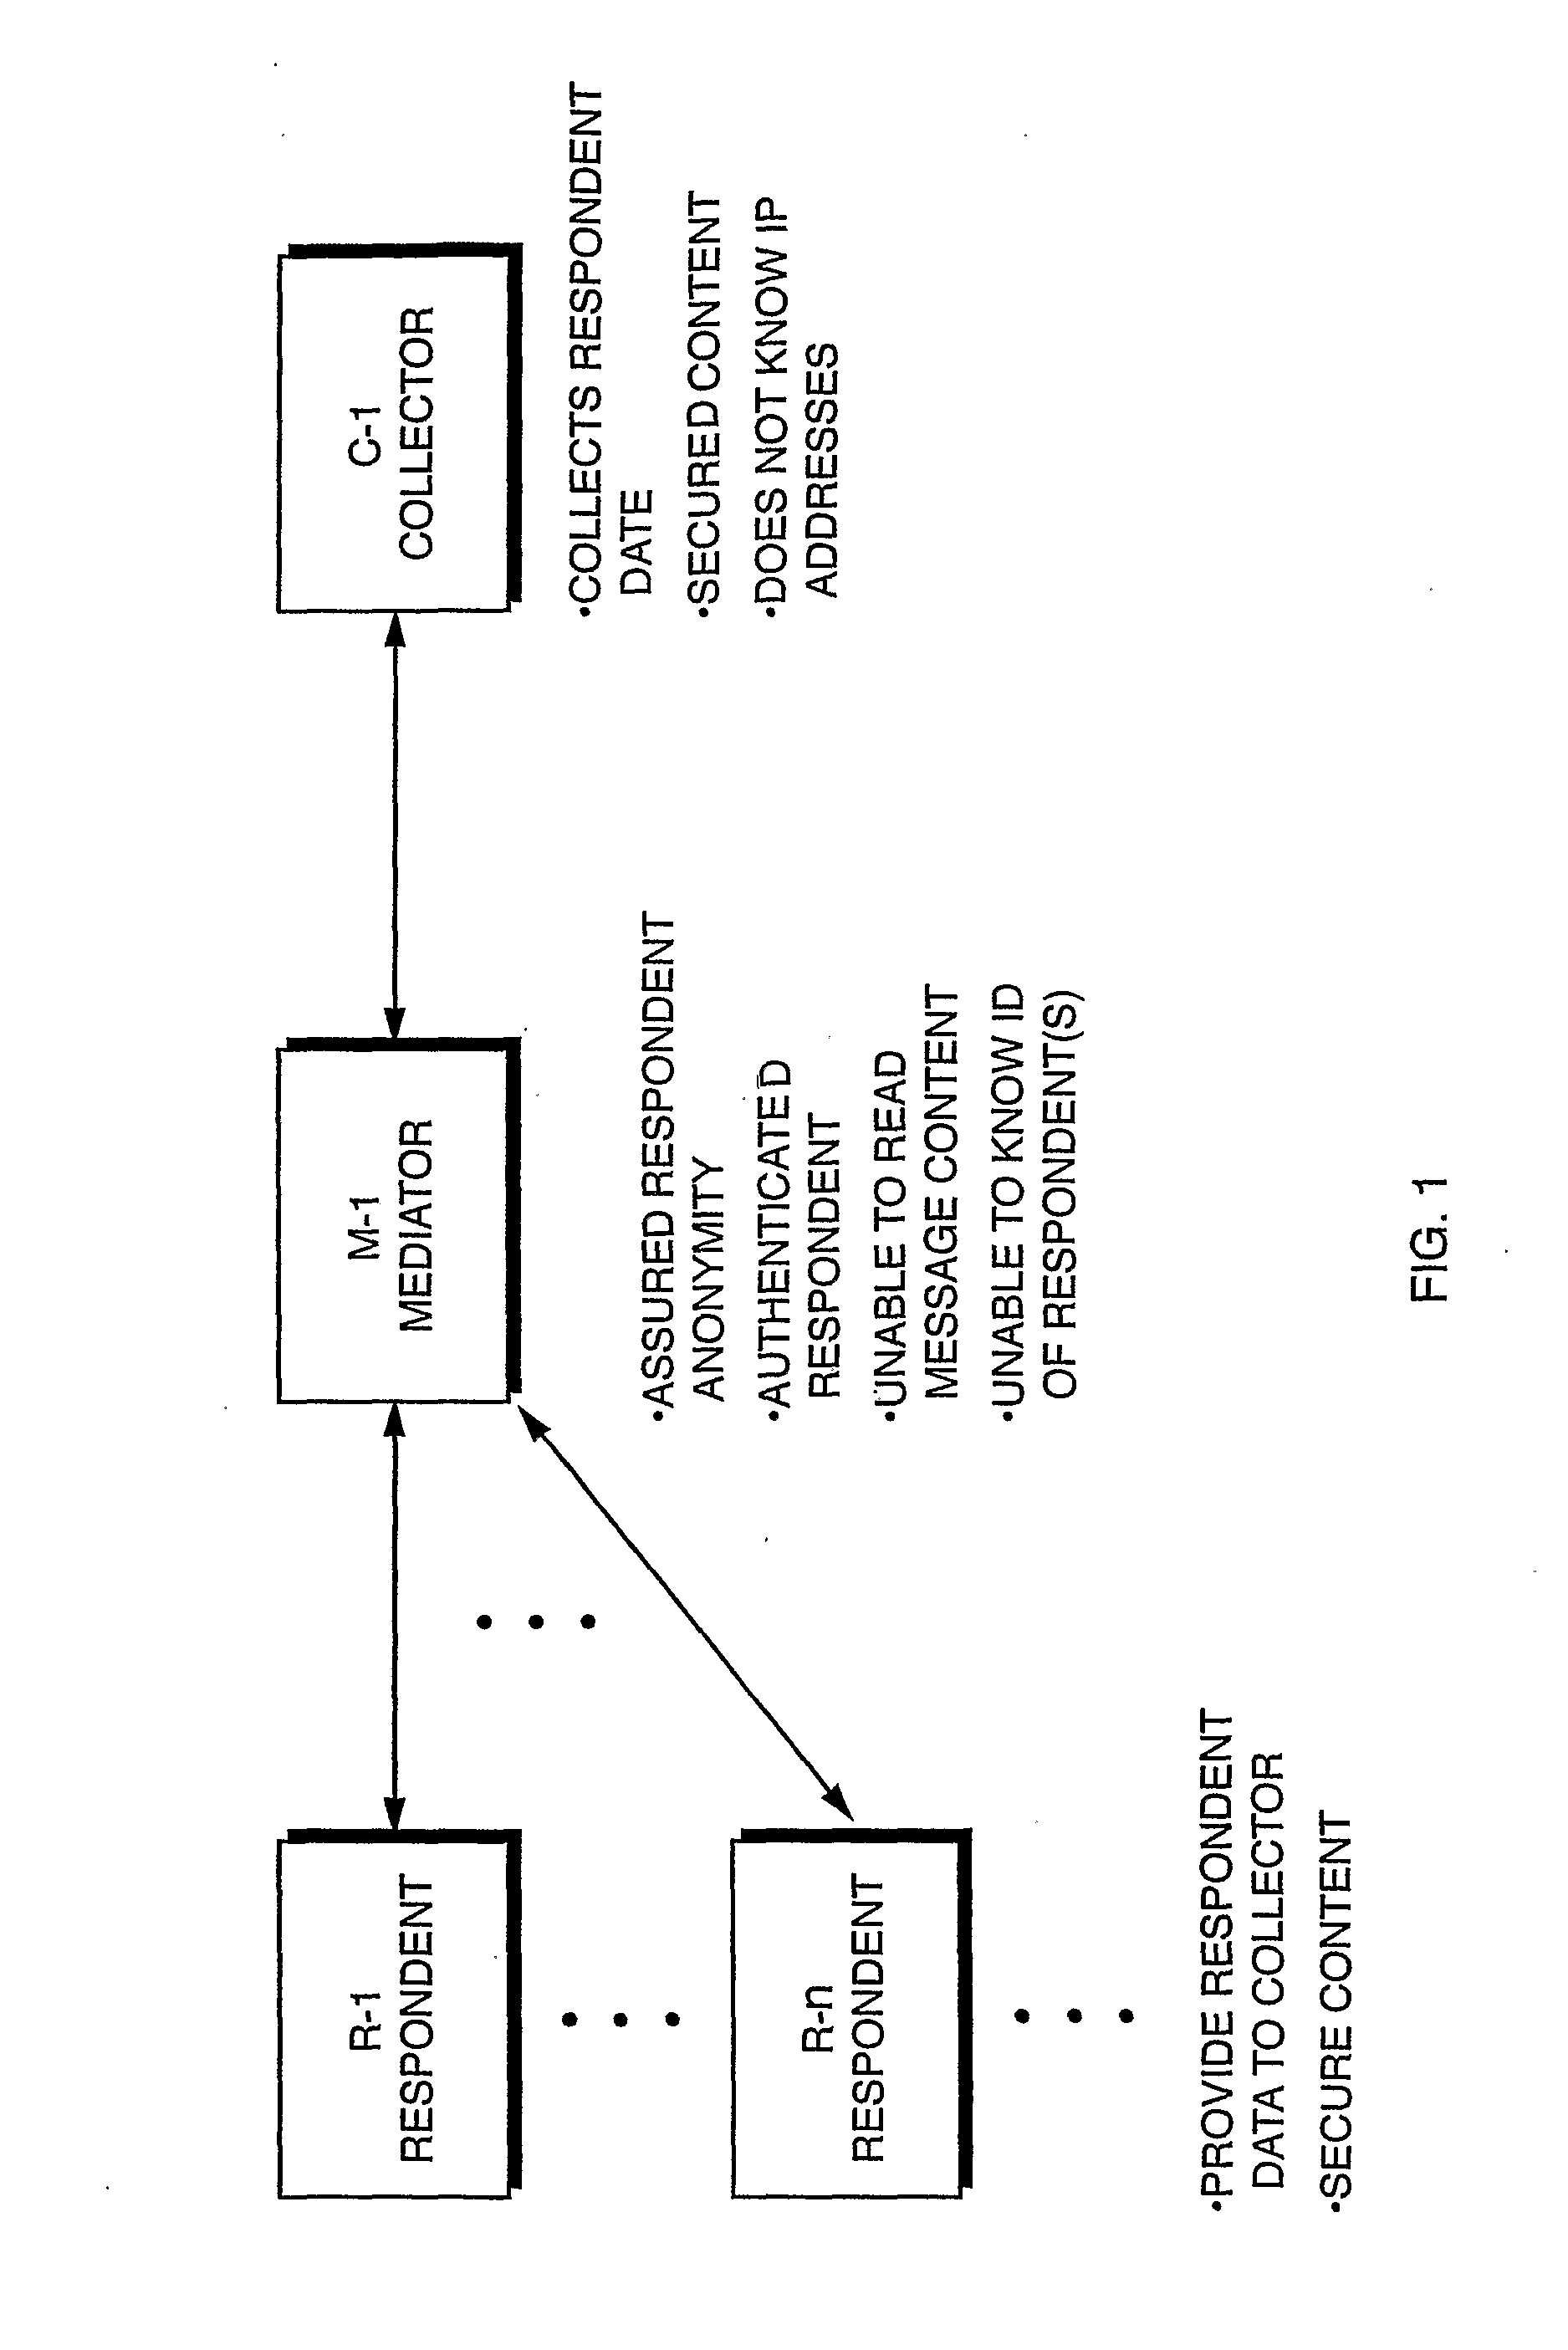 Transmission of Anonymous Information Through a Communication Network